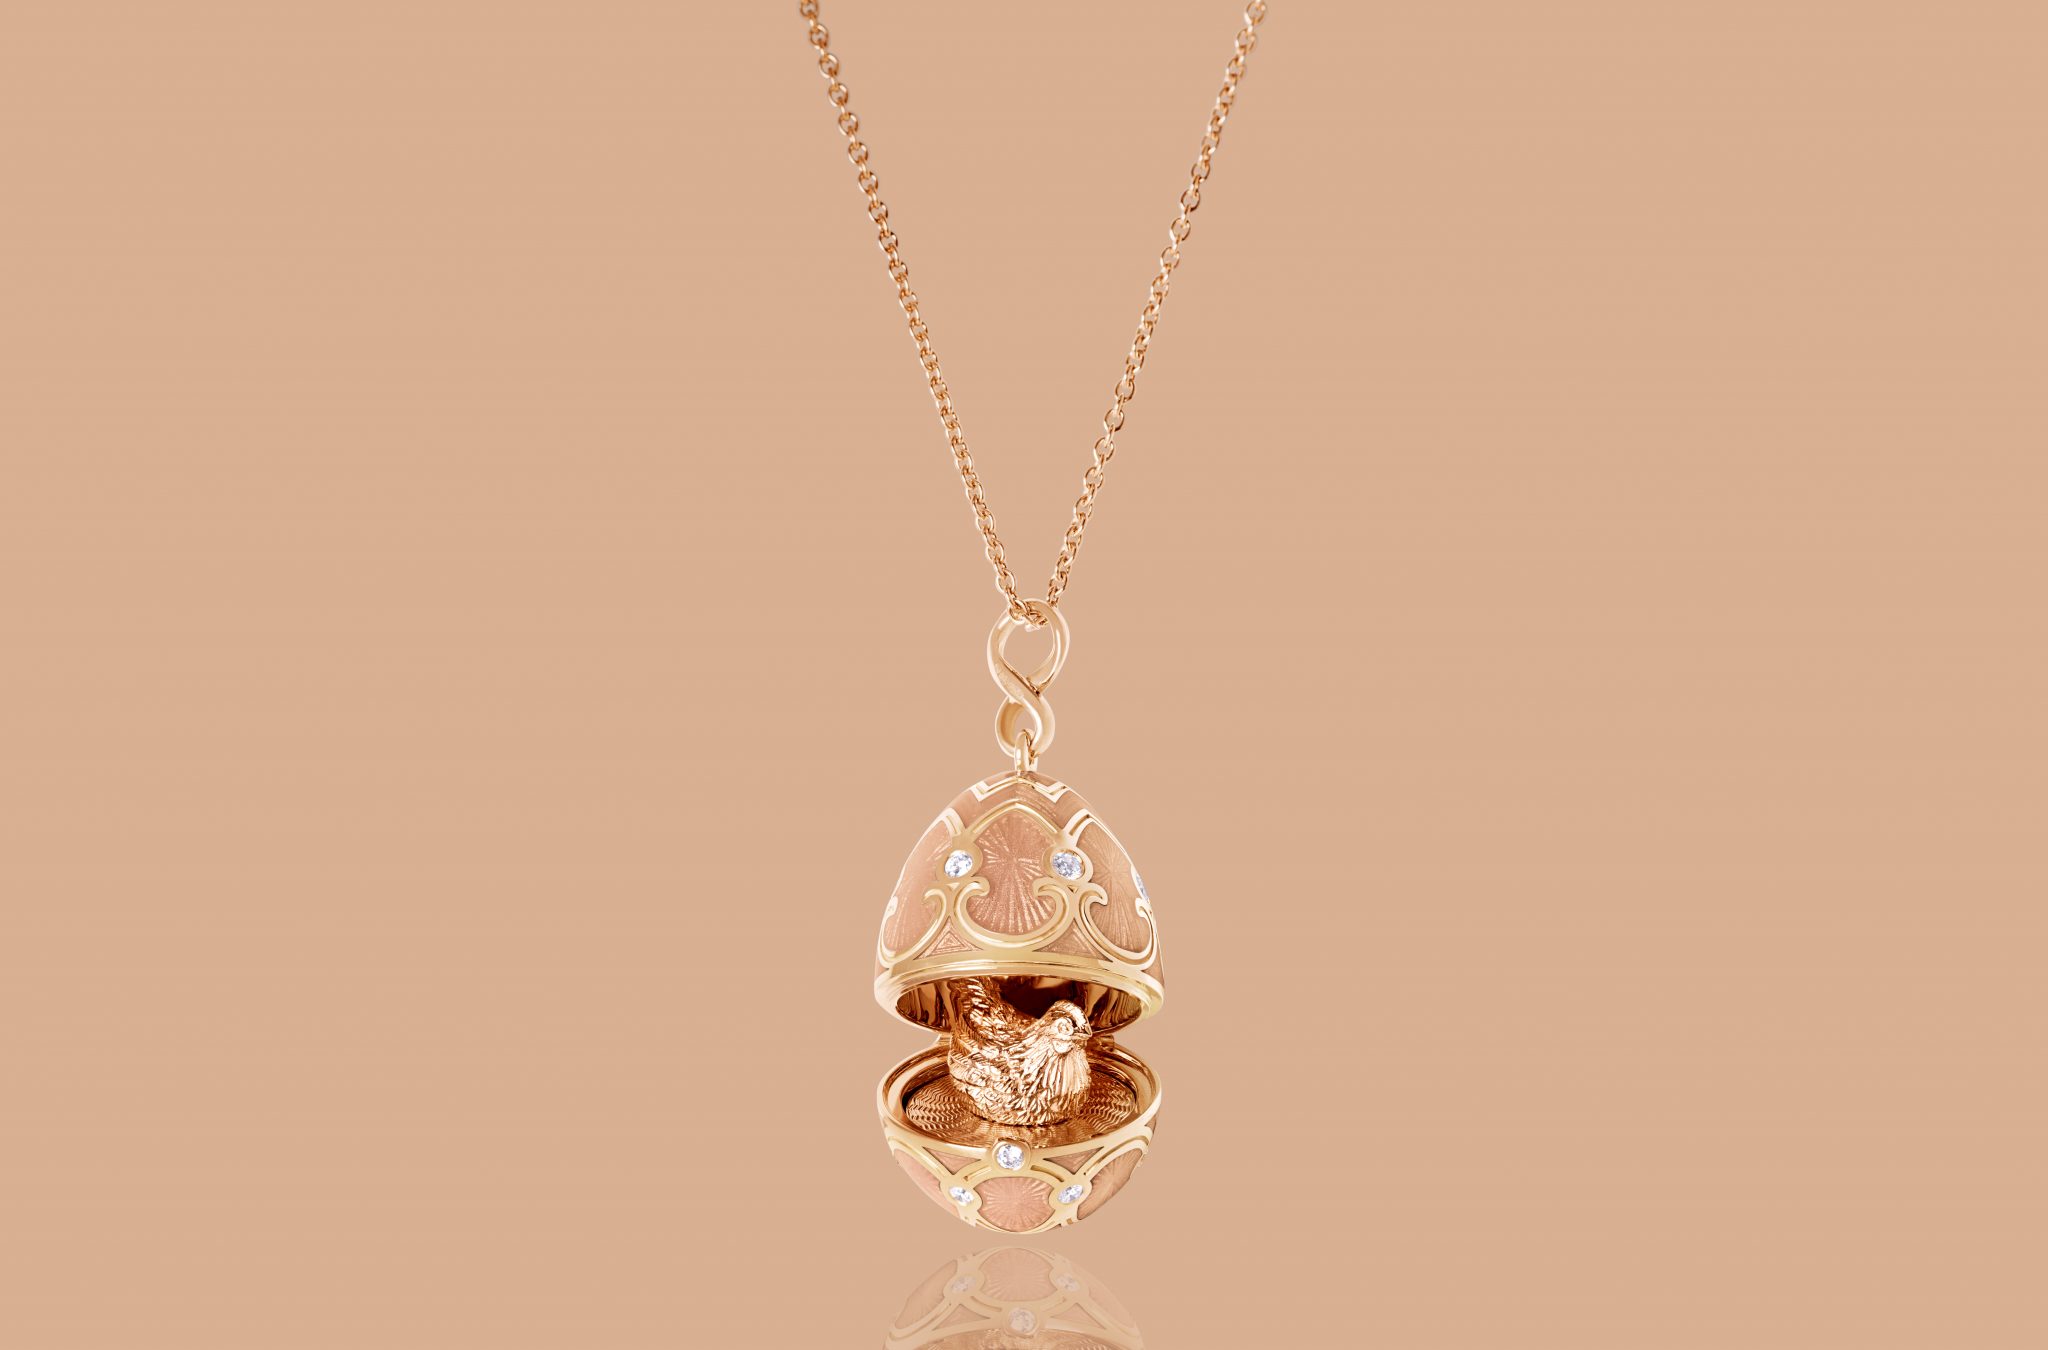 Commercial photo of an intricate golden pendant